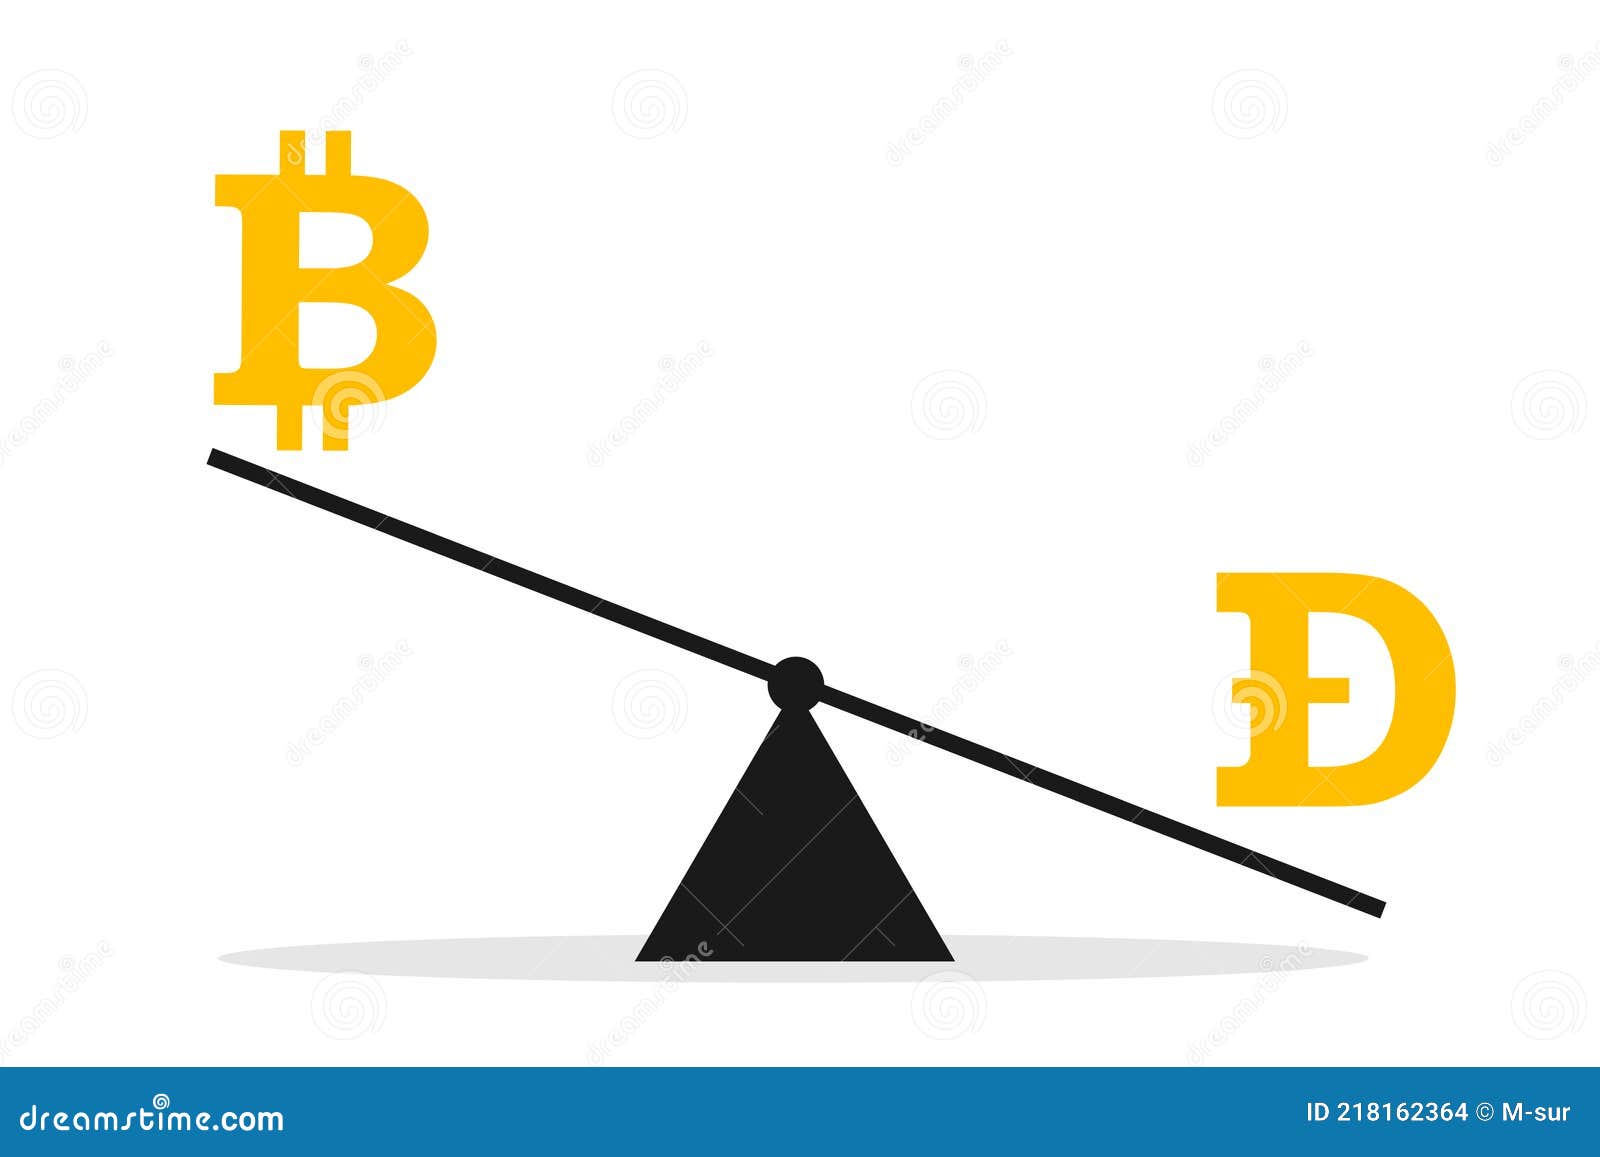 Bitcoin And Dogecoin Are Compared On Weight And Scale ...